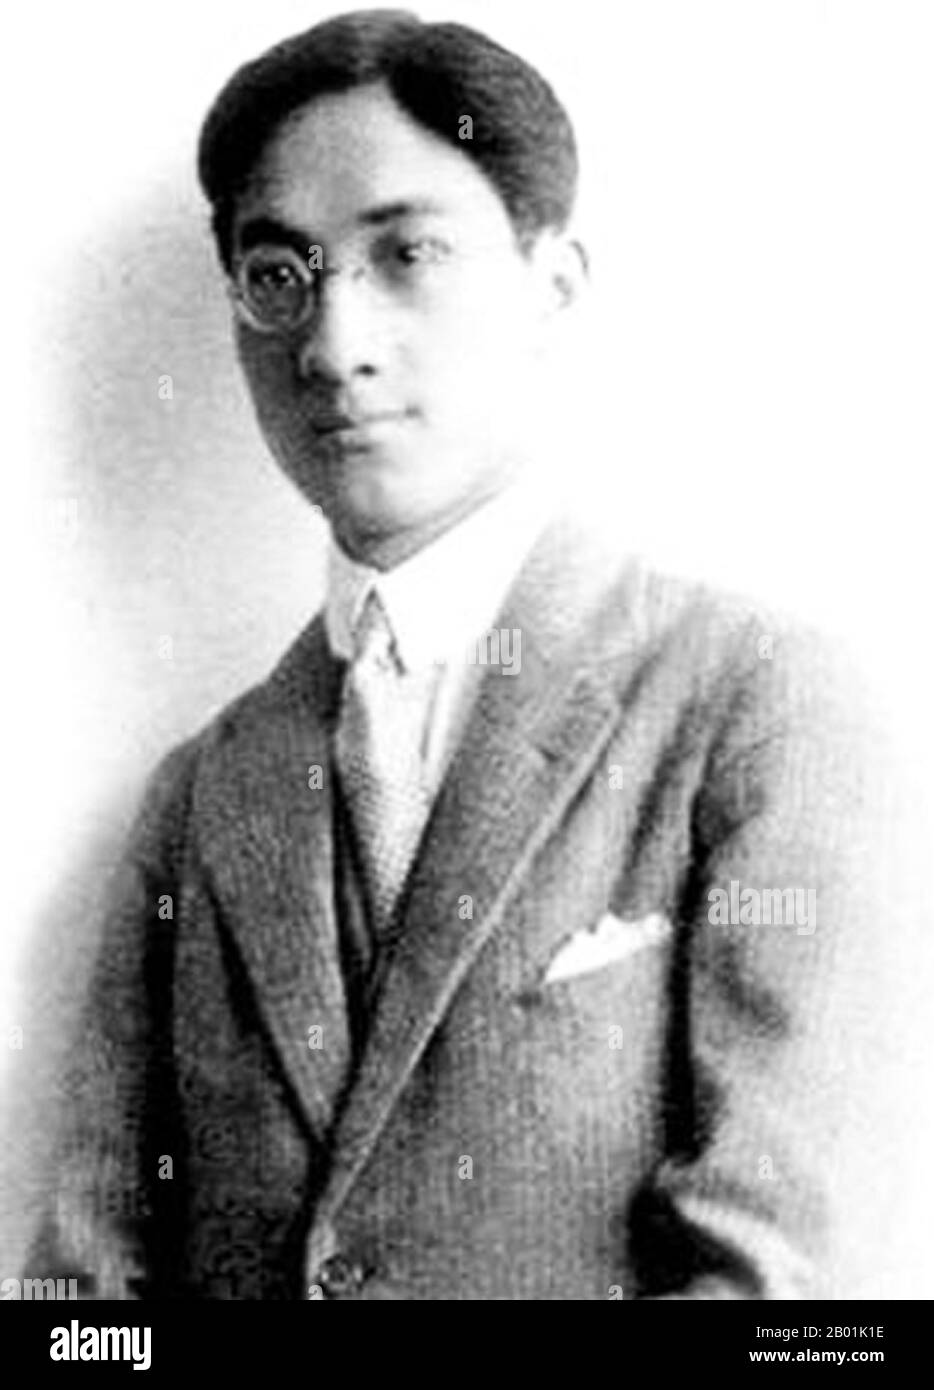 Xu Zhimo (Chinese: 徐志摩; pinyin: Xú Zhìmó; Wade–Giles: Hsü Chih-mo, January 15, 1897 – November 19, 1931) was an early 20th century Chinese poet. He was given the name of Zhangxu (章垿) and the courtesy name of Yousen (槱森). He later changed his courtesy name to Zhimo (志摩).  He is romanticized as pursuing love, freedom, and beauty all his life (from the words of Hu Shi). He promoted the form of modern Chinese poetry, and therefore made tremendous contributions to modern Chinese literature.  To commemorate Xu Zhimo, in July, 2008, a white marble stone has been installed at the back of King's Colleg Stock Photo